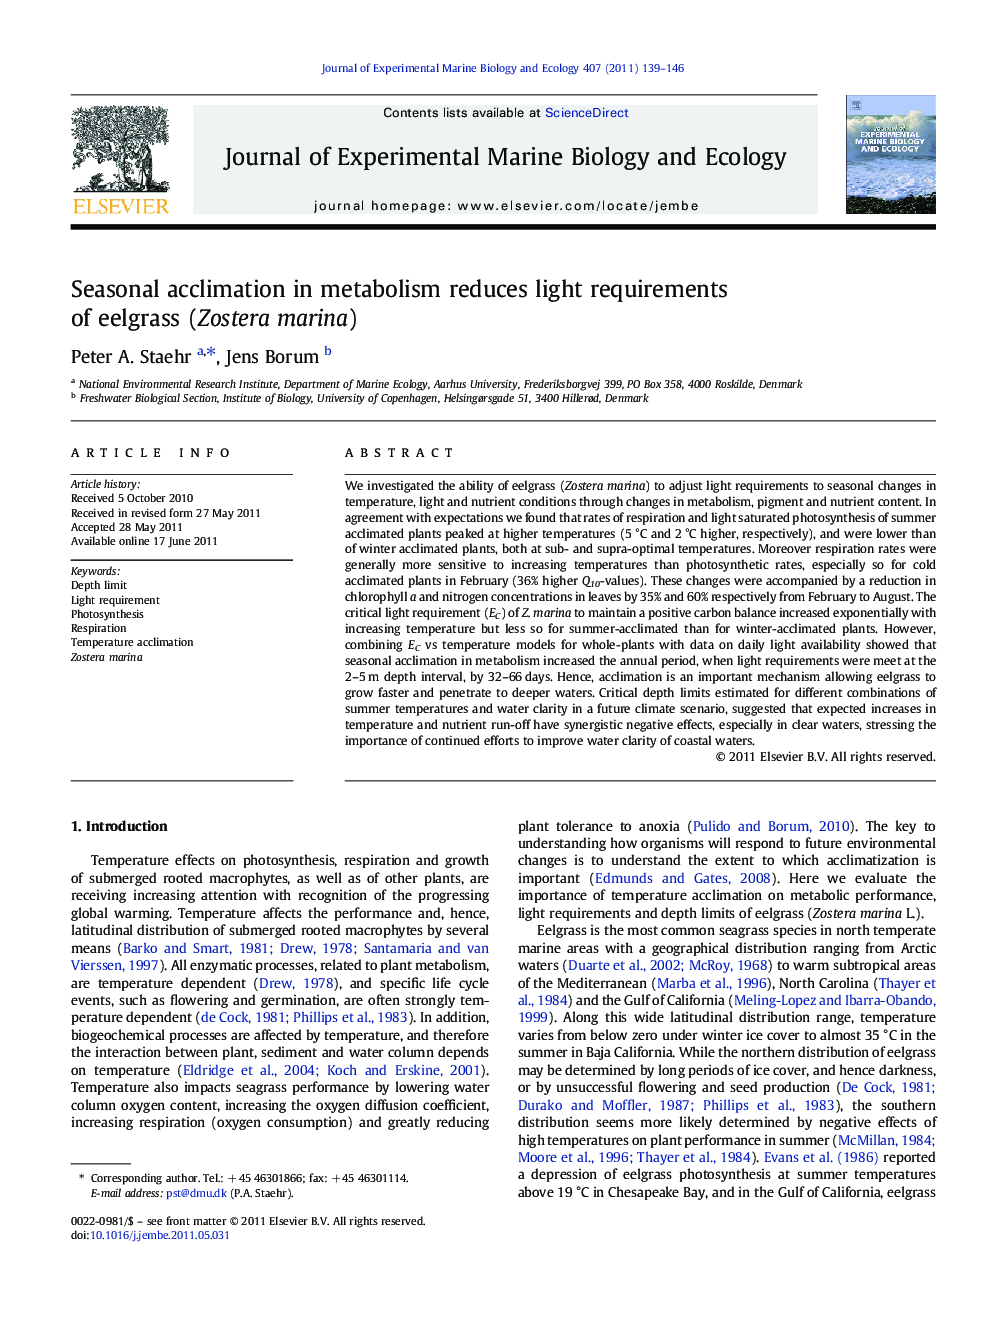 Seasonal acclimation in metabolism reduces light requirements of eelgrass (Zostera marina)